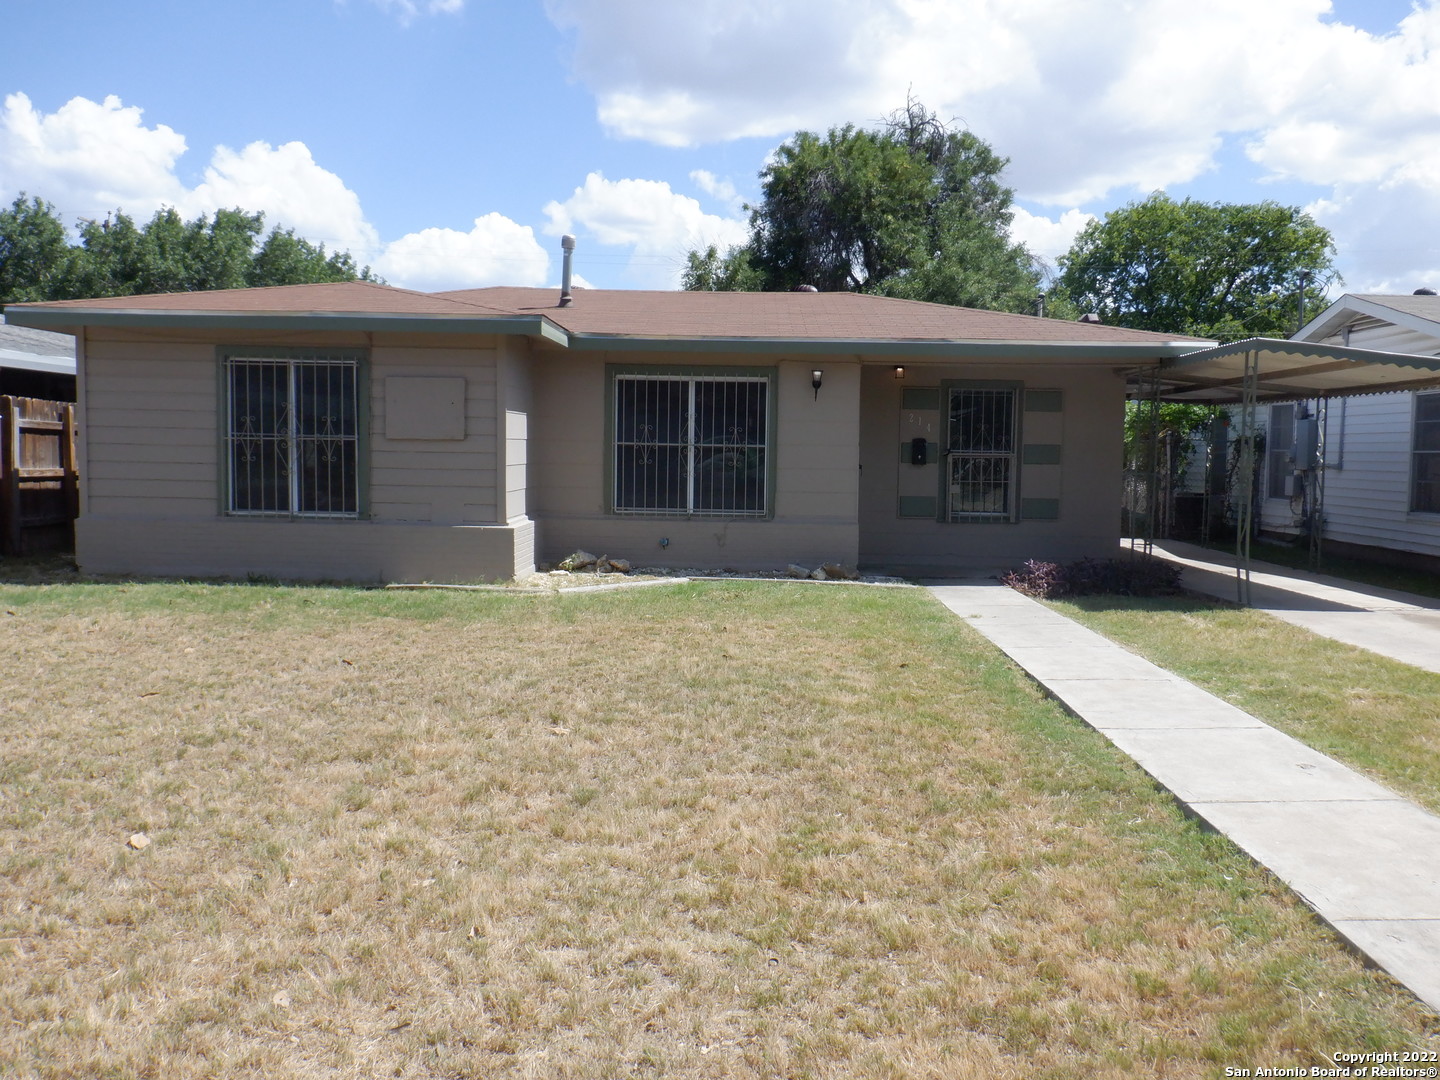 Adorable 2-bedroom 1 bath home located in an established neighborhood. Easy access to HWY 90, minutes from downtown. Freshly painted interior, newly installed roof in 2022, schedule a showing with your agent today!